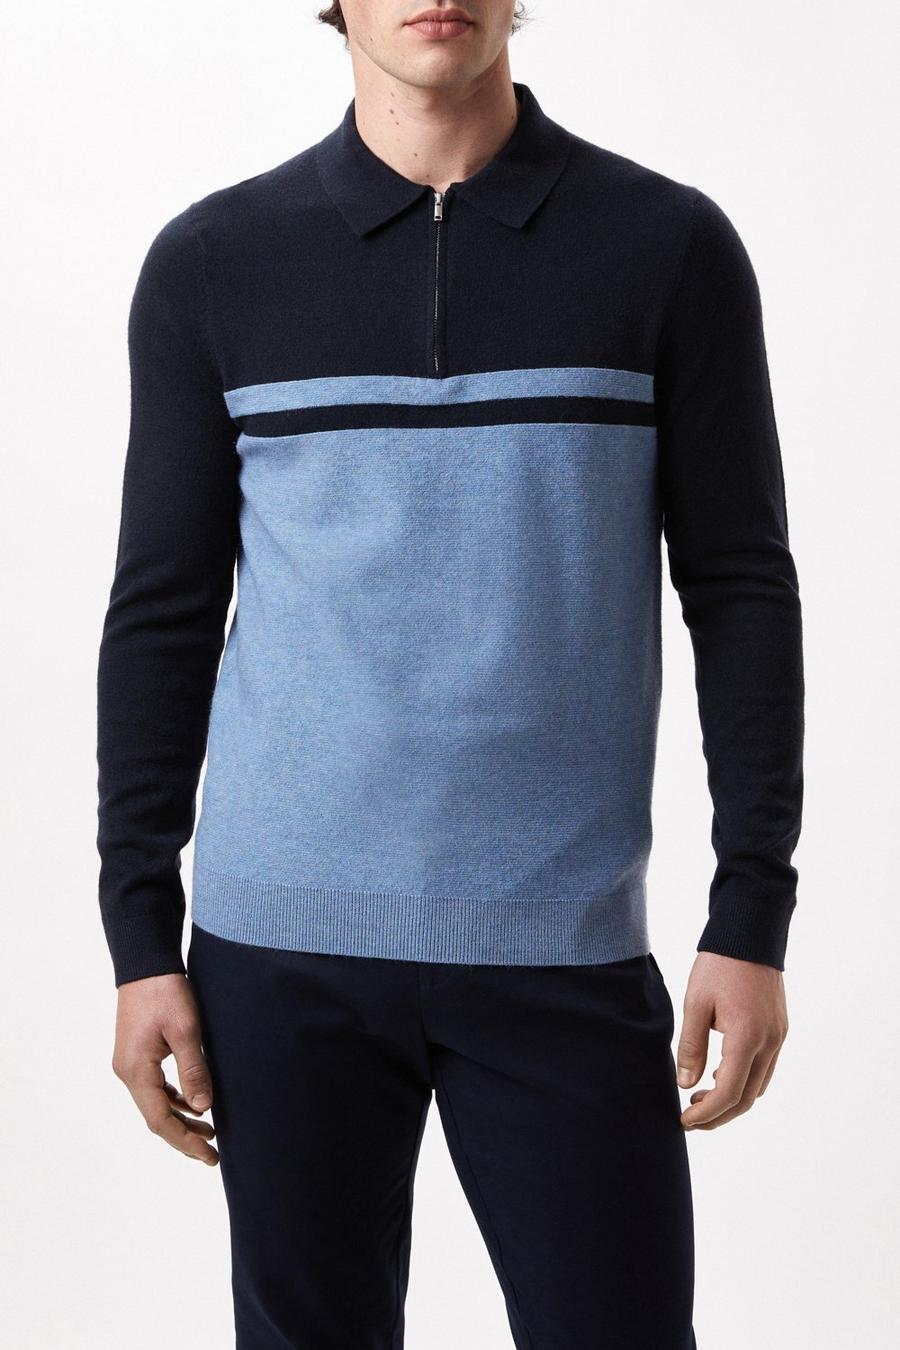 Super Soft Navy Two Tone Knitted Zip Up Polo Shirt